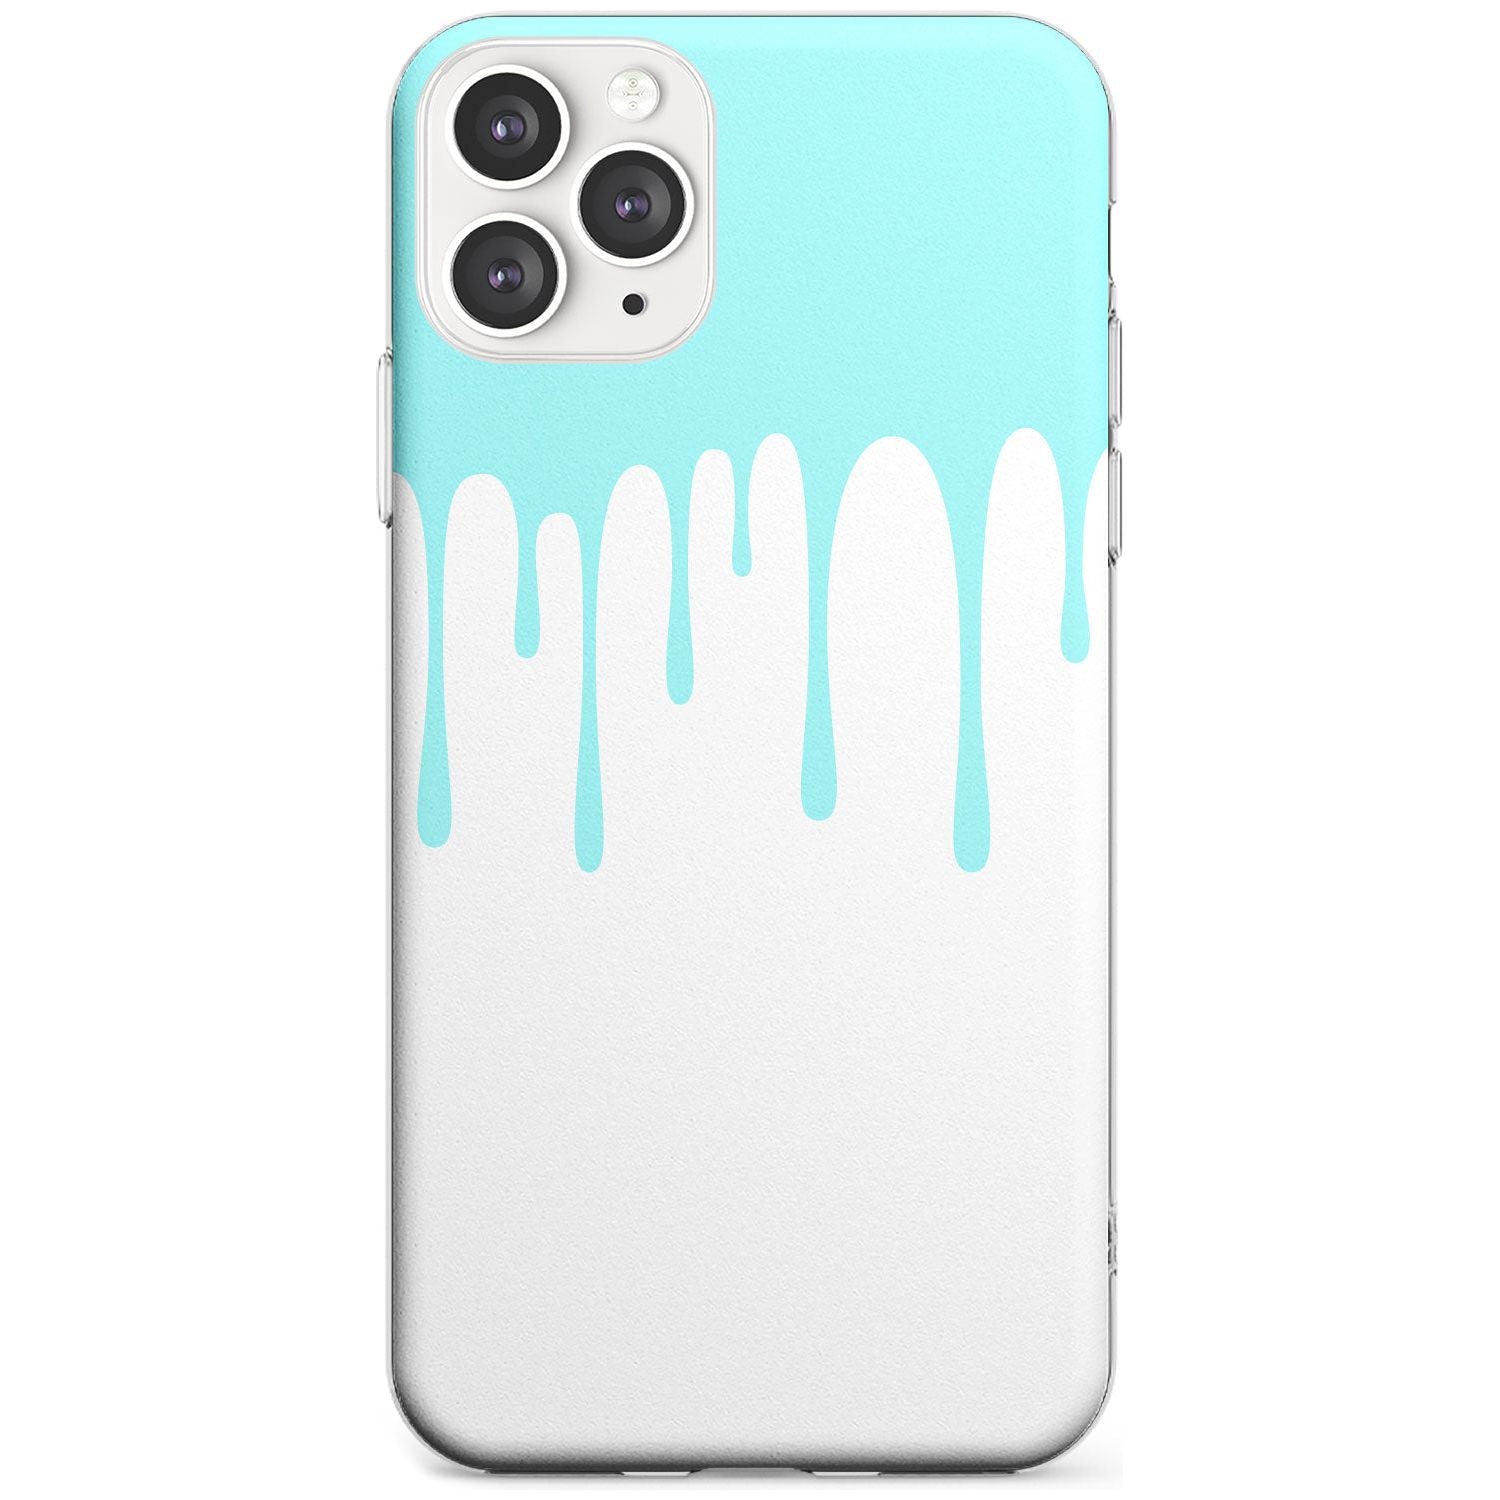 Melted Effect: Teal & White iPhone Case Slim TPU Phone Case Warehouse 11 Pro Max